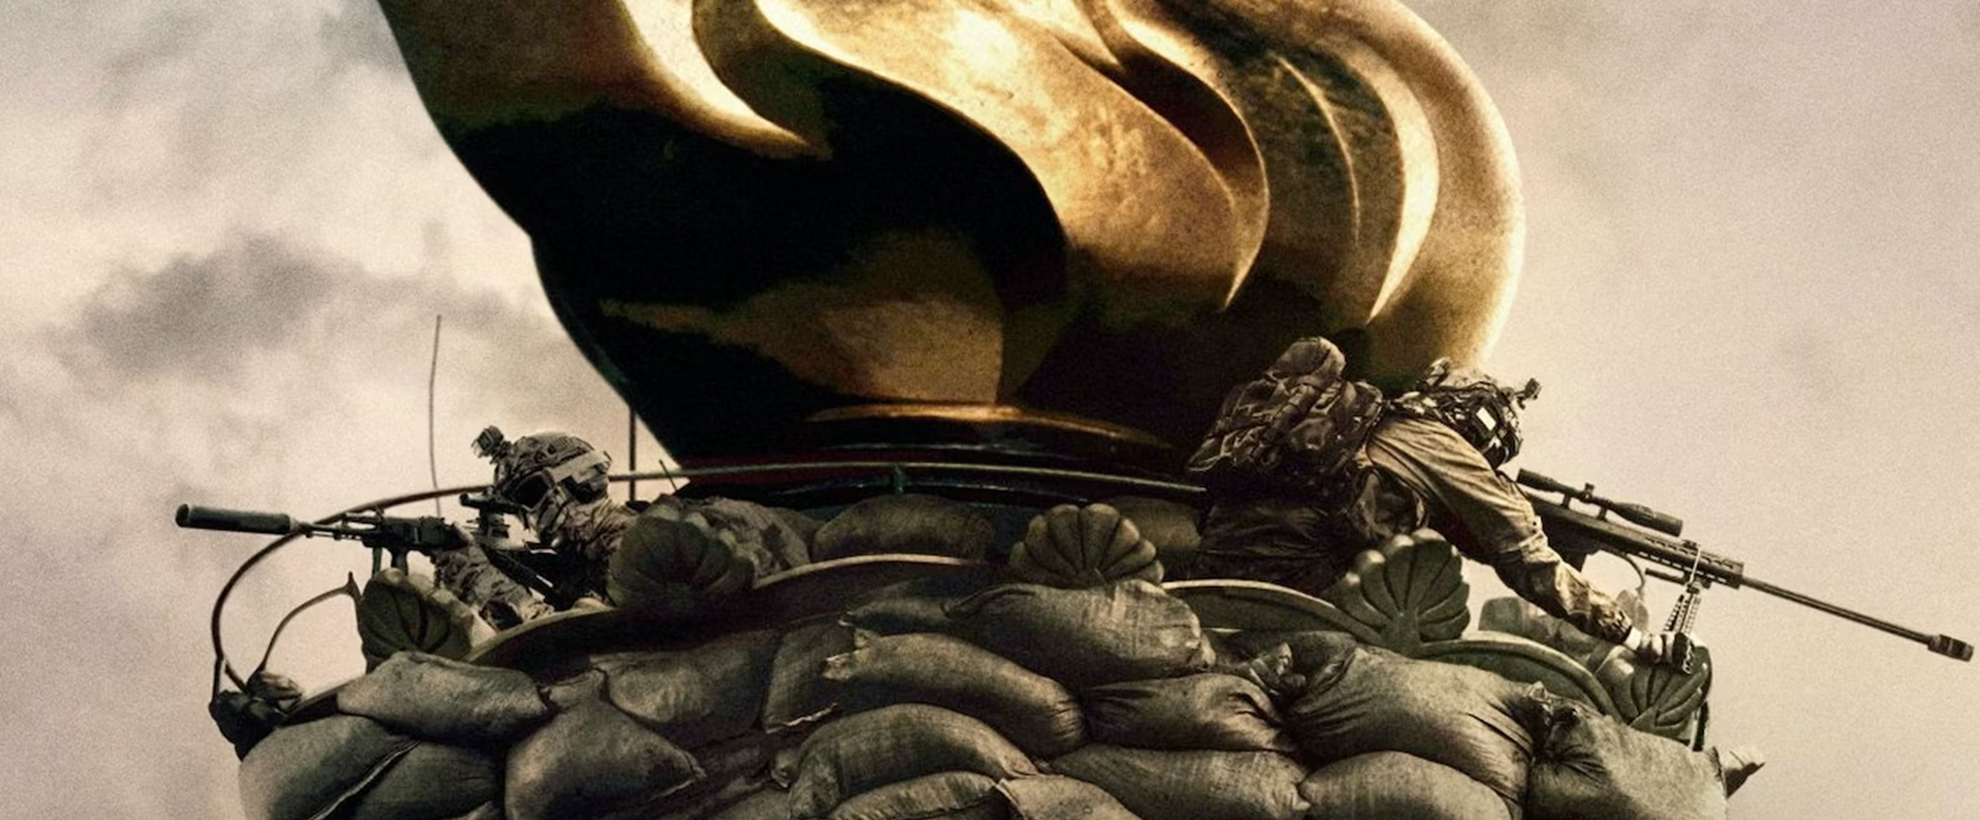 The statue of liberty's torch with soldiers and sandbags 